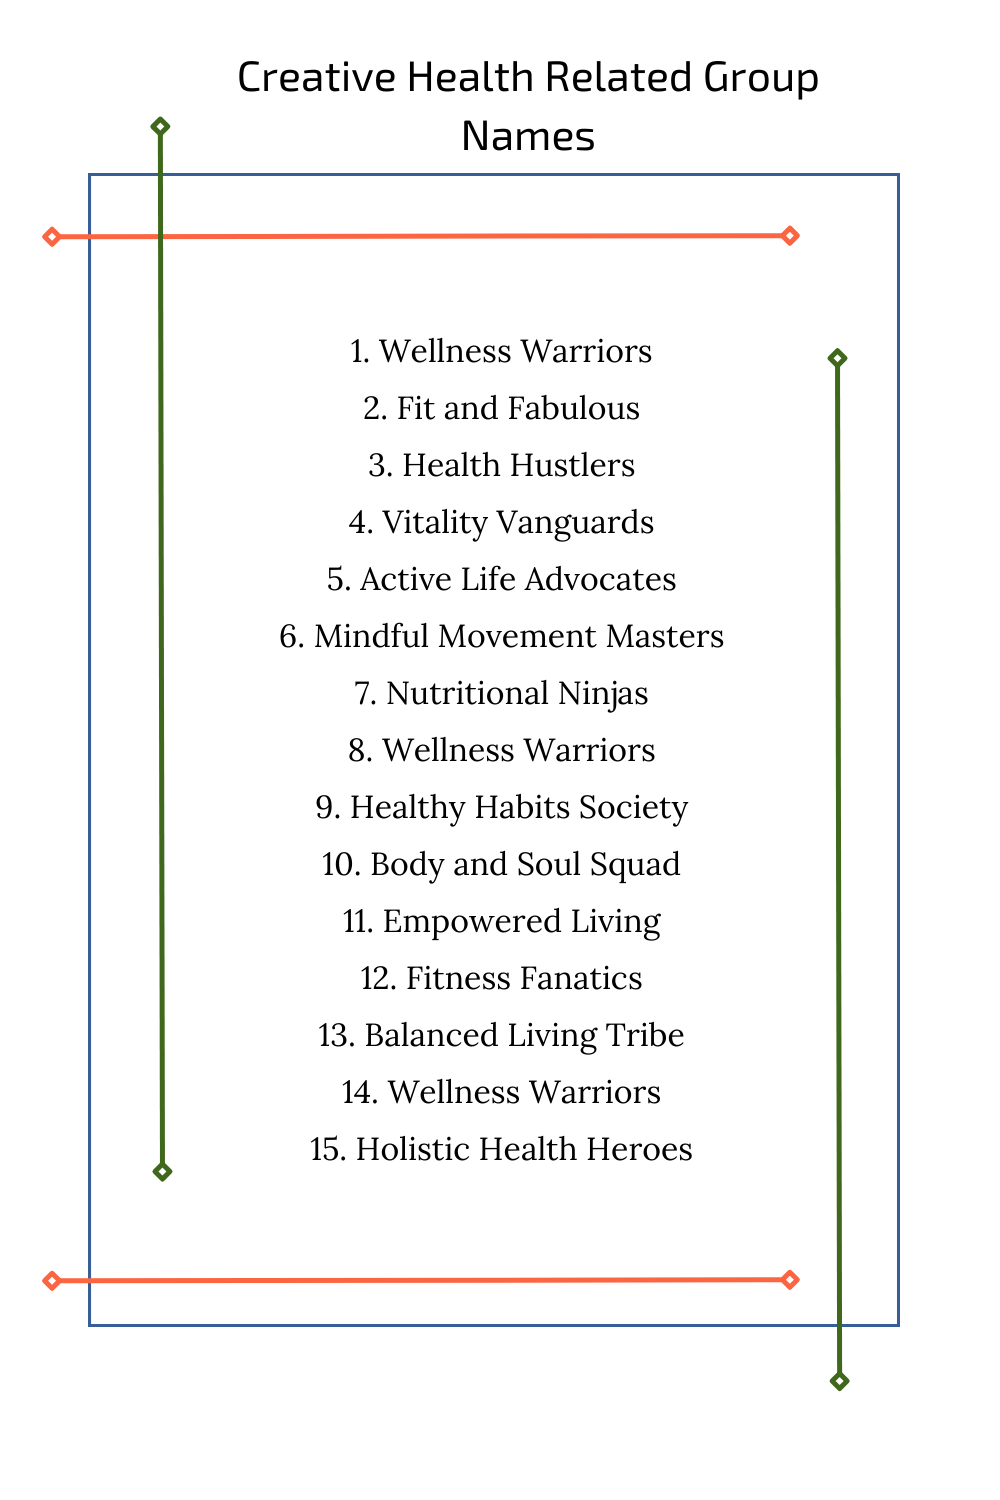 Creative Health Related Group Names